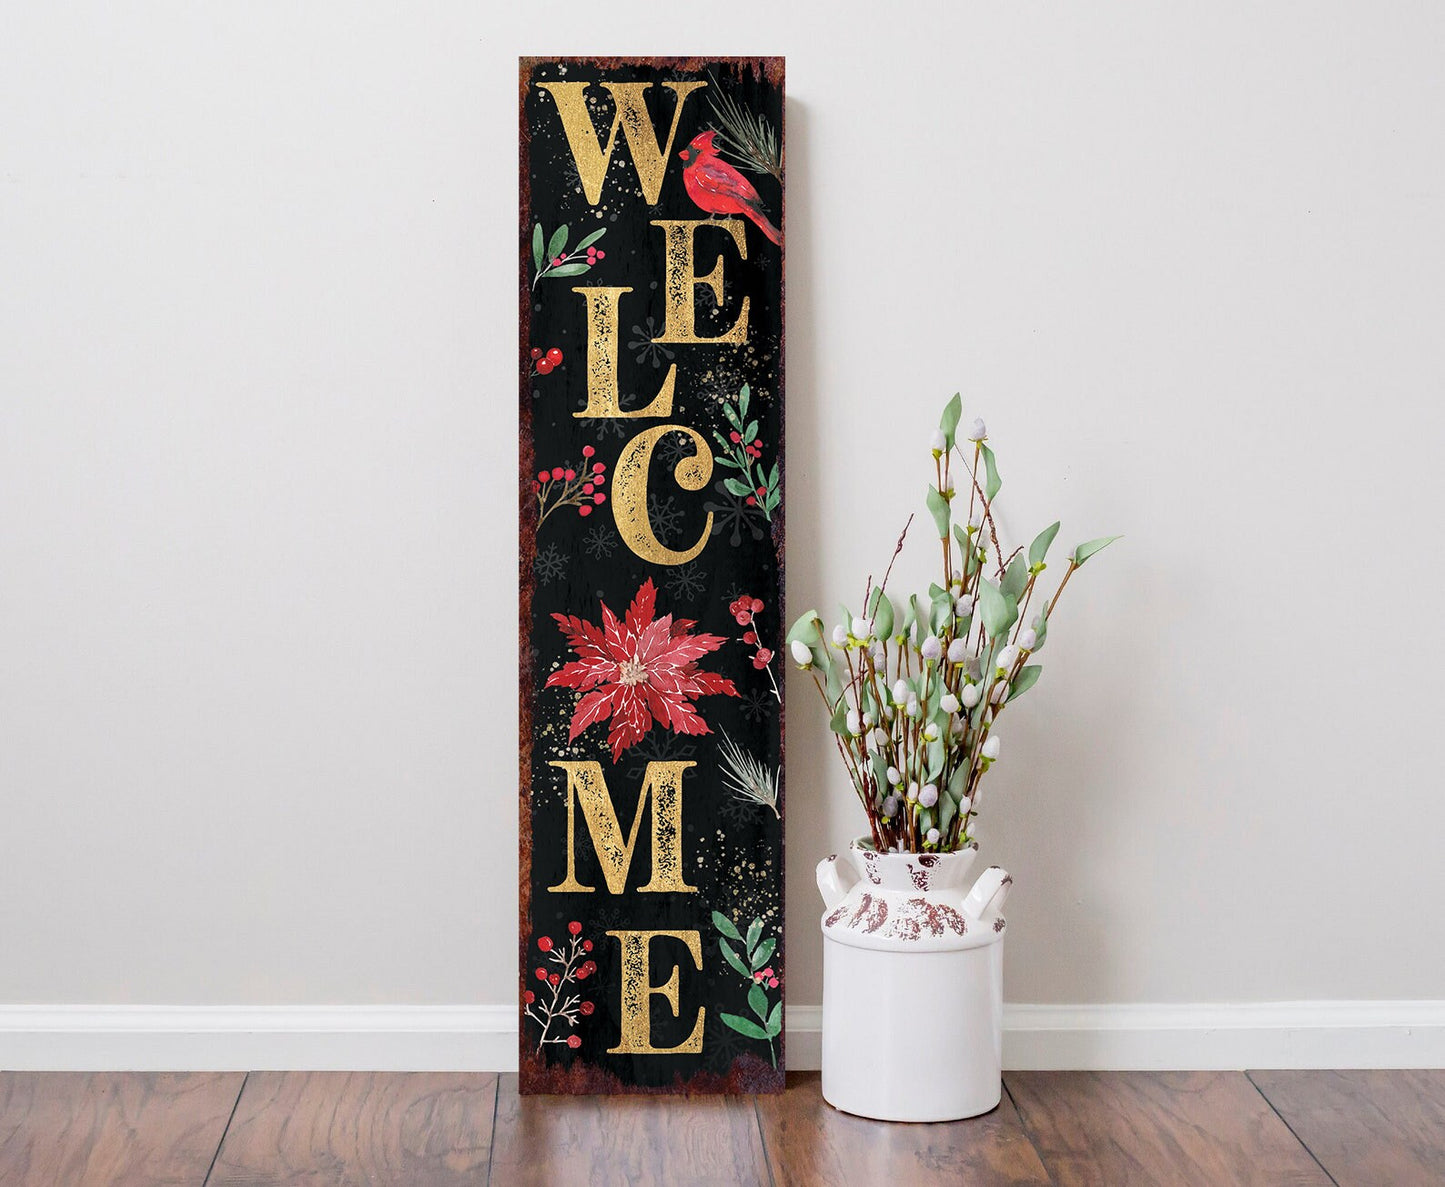 36in "Welcome" Christmas Porch Sign - Front Porch Christmas Welcome Sign, Rustic Modern Farmhouse Entryway Board